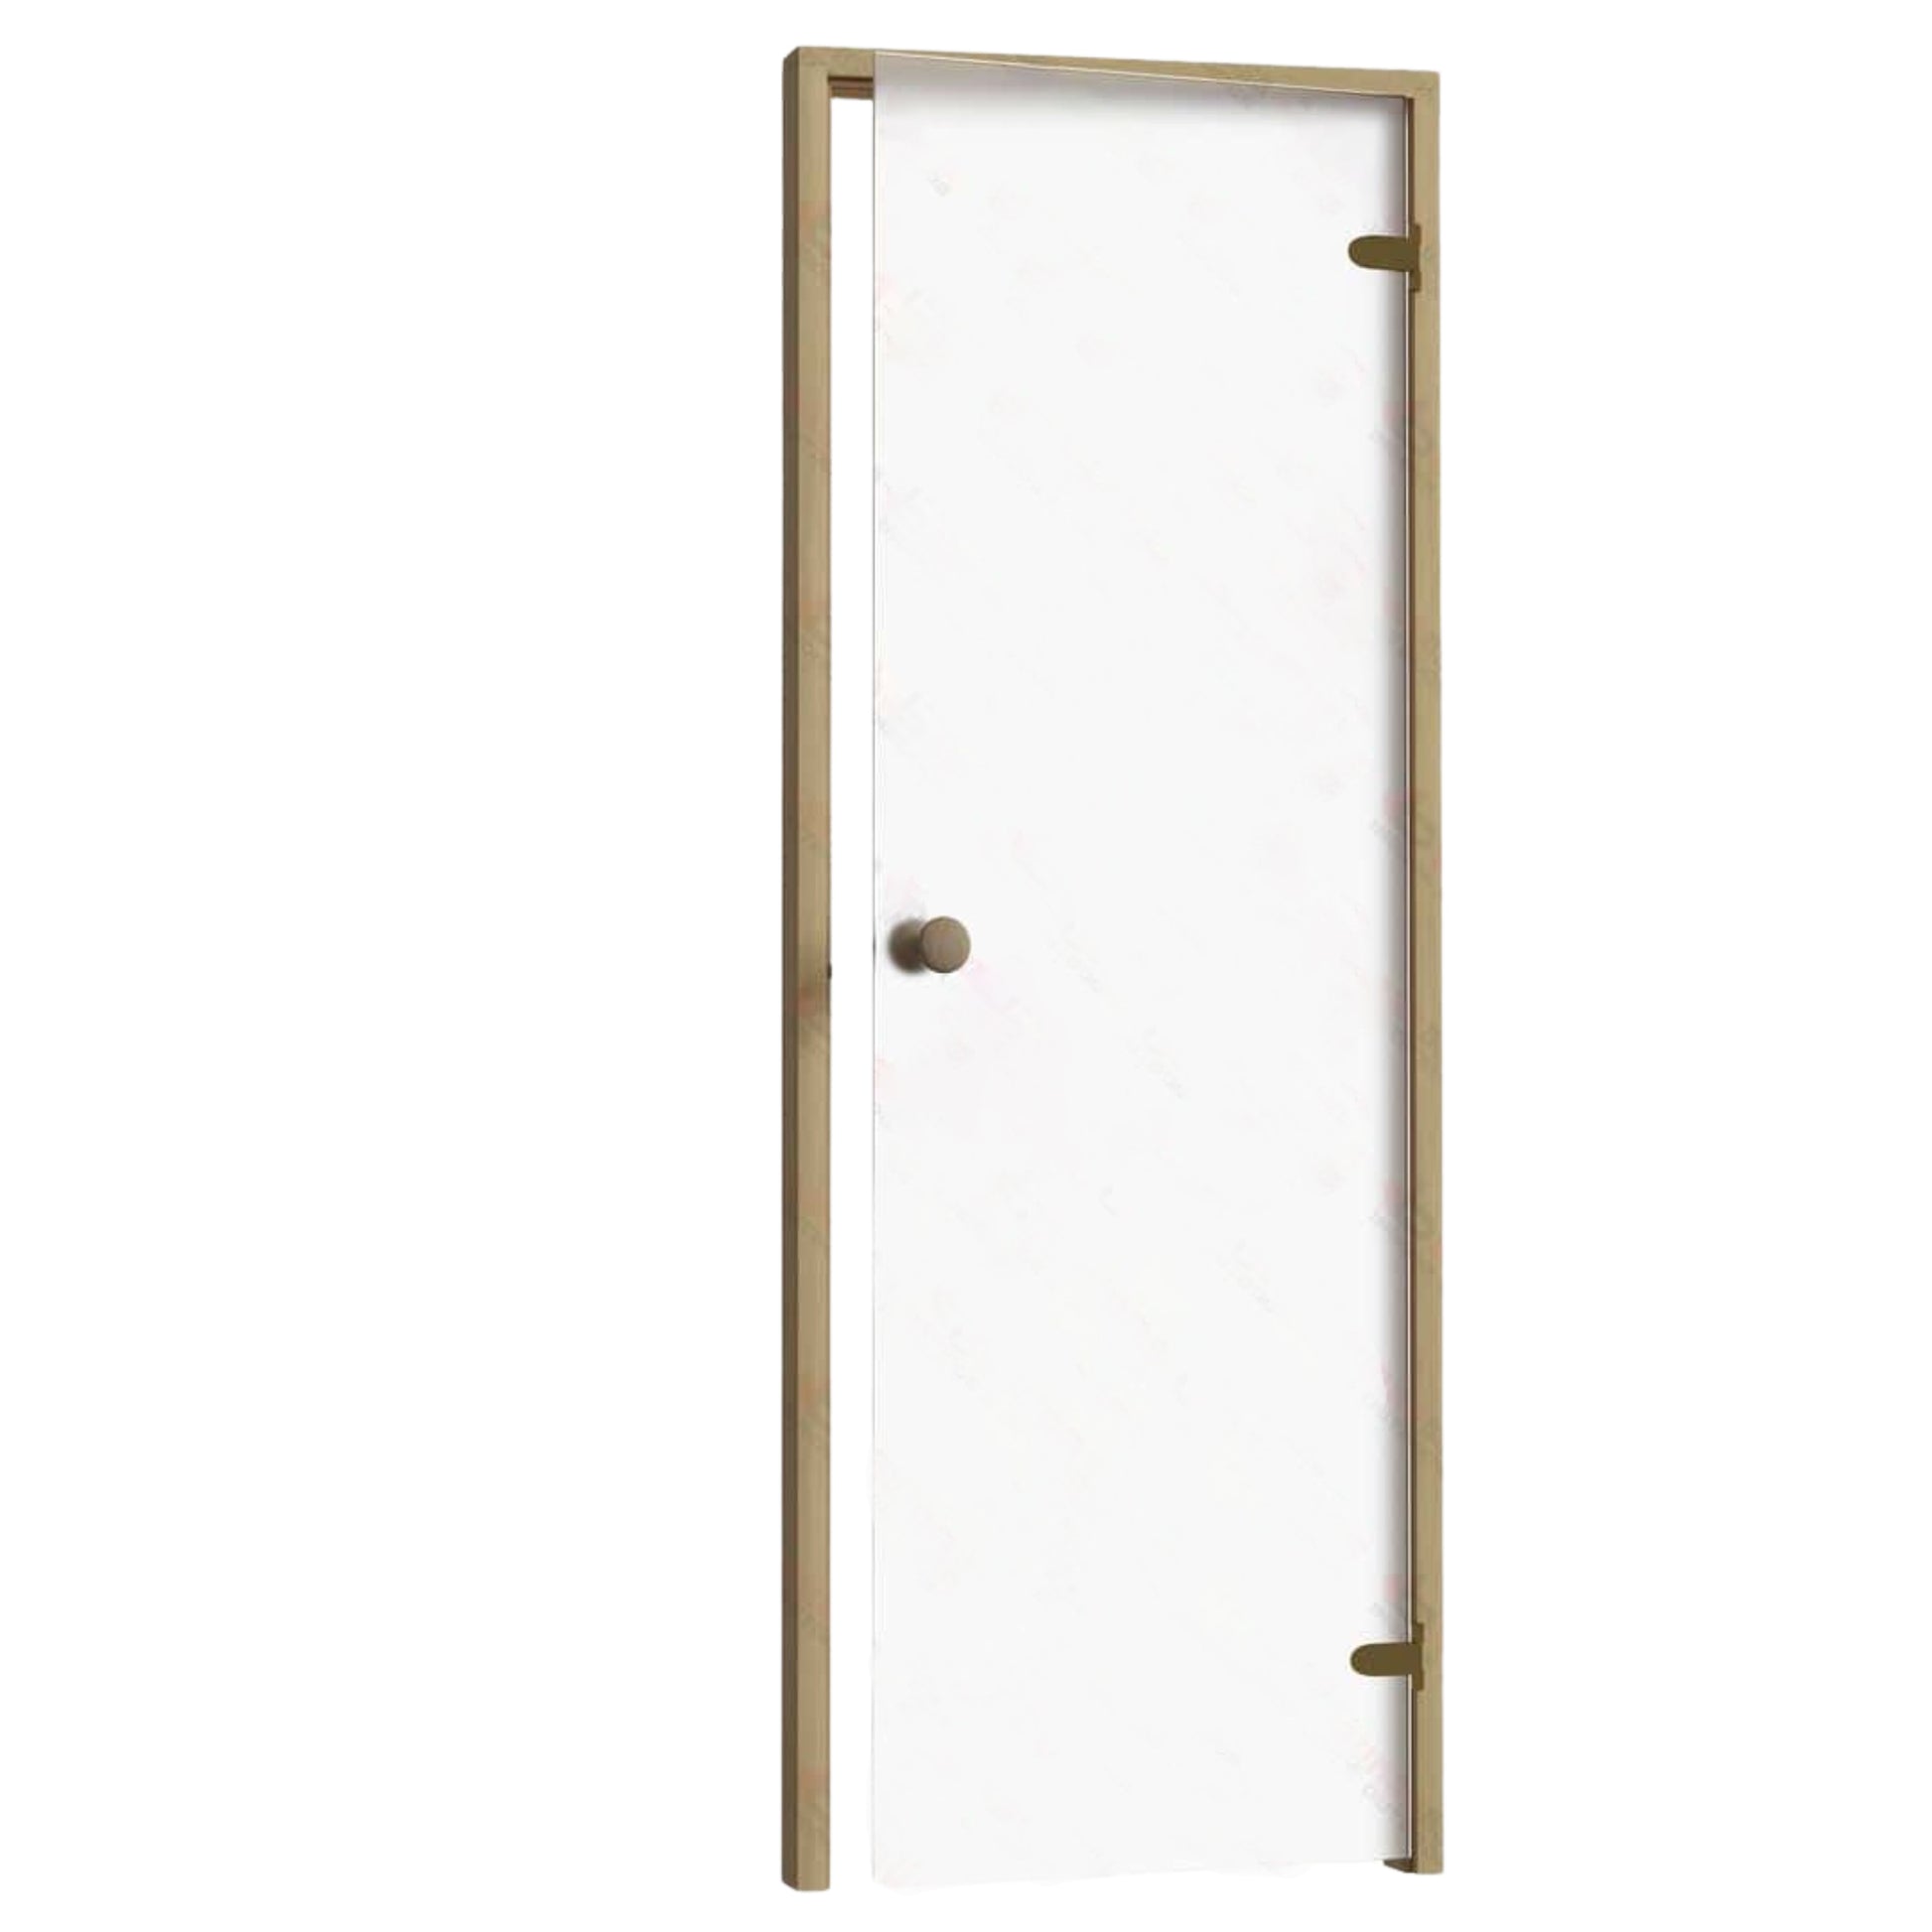 Frosted sauna glass door right side